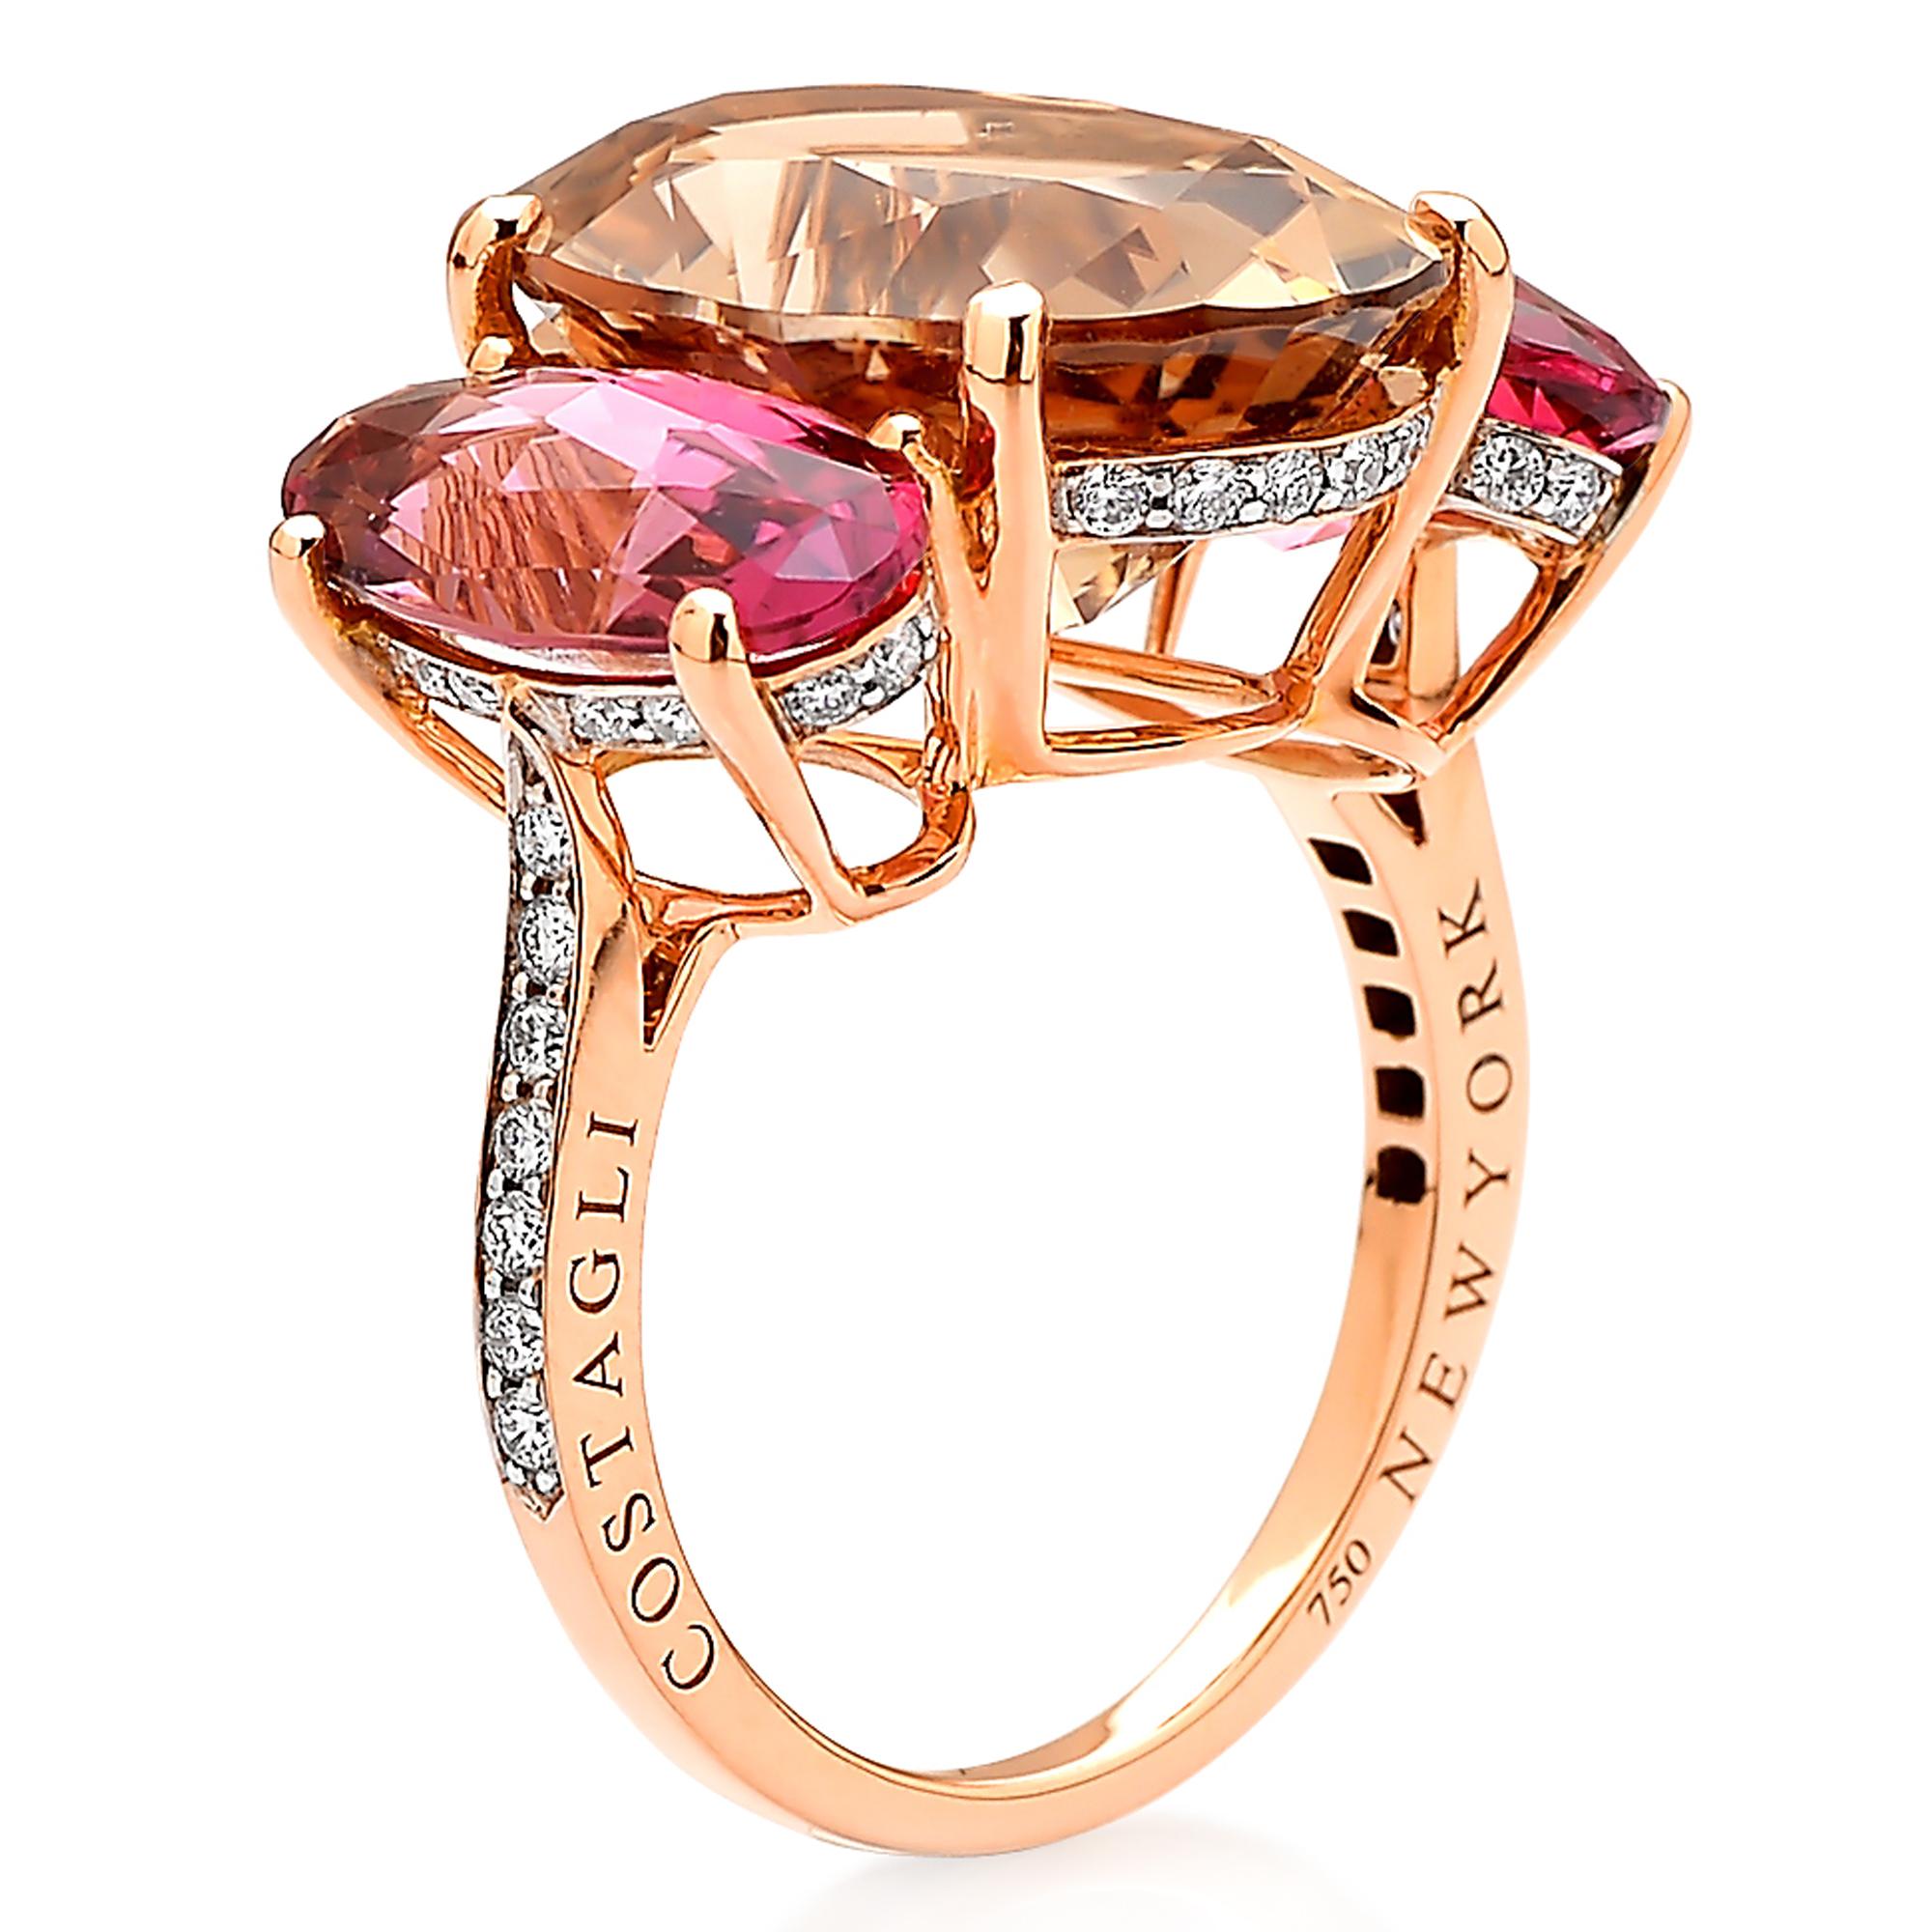 Contemporary Paolo Costagli 18KT Rose Gold Champagne and Pink Tourmaline Ring with Diamond